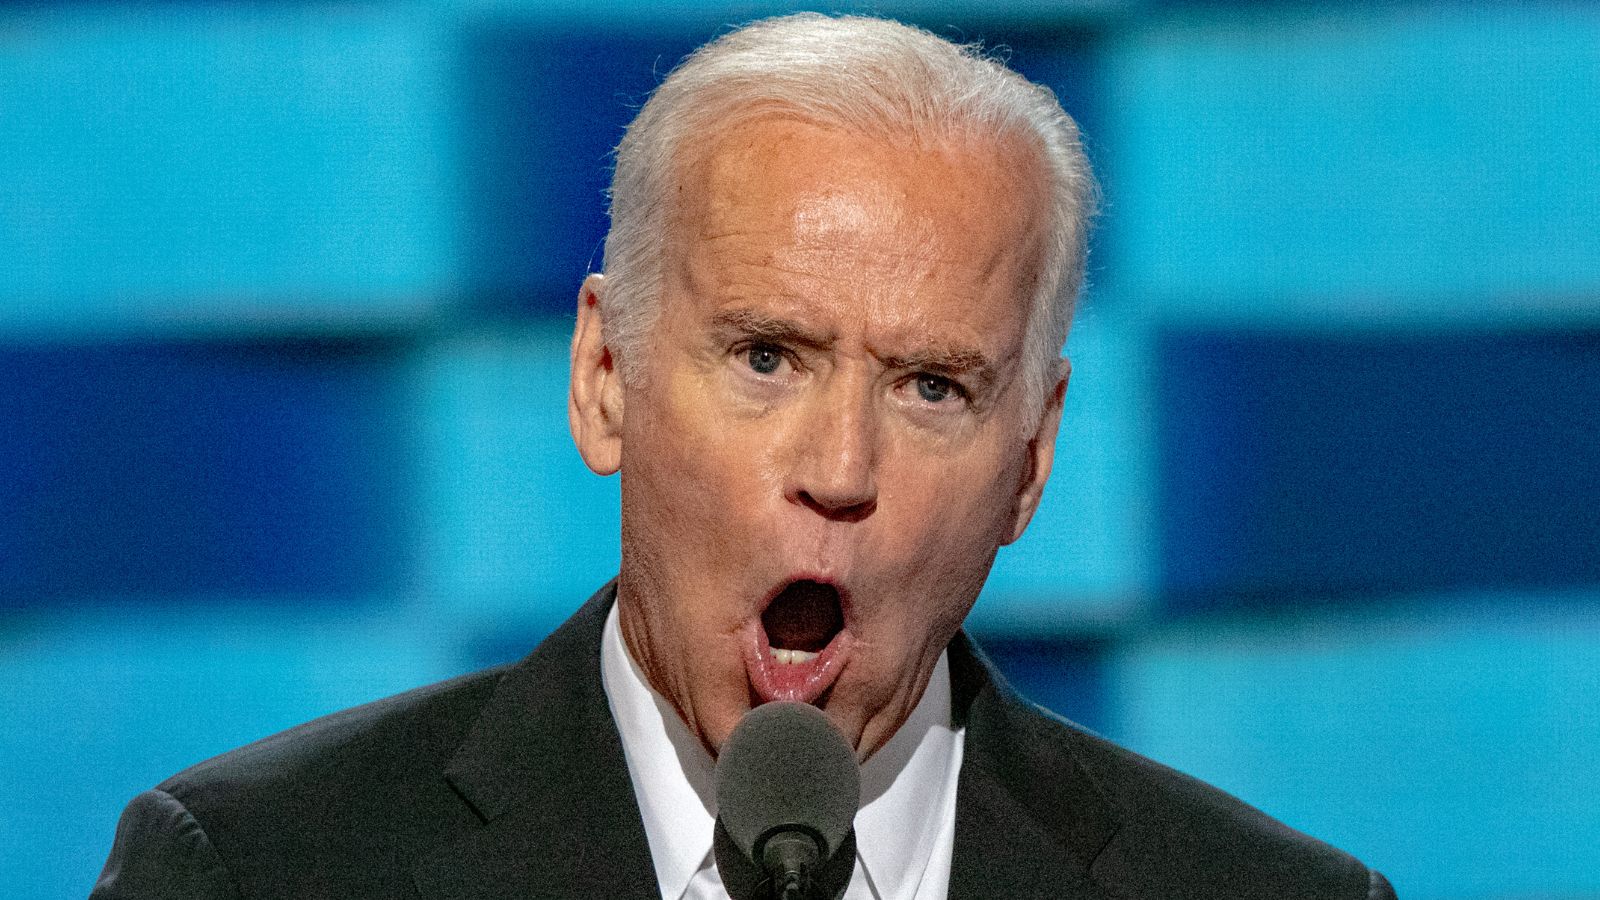 “Someone Is Really Desperate”: Report Casts Doubt Over Biden’s Involvement With Son’s Business